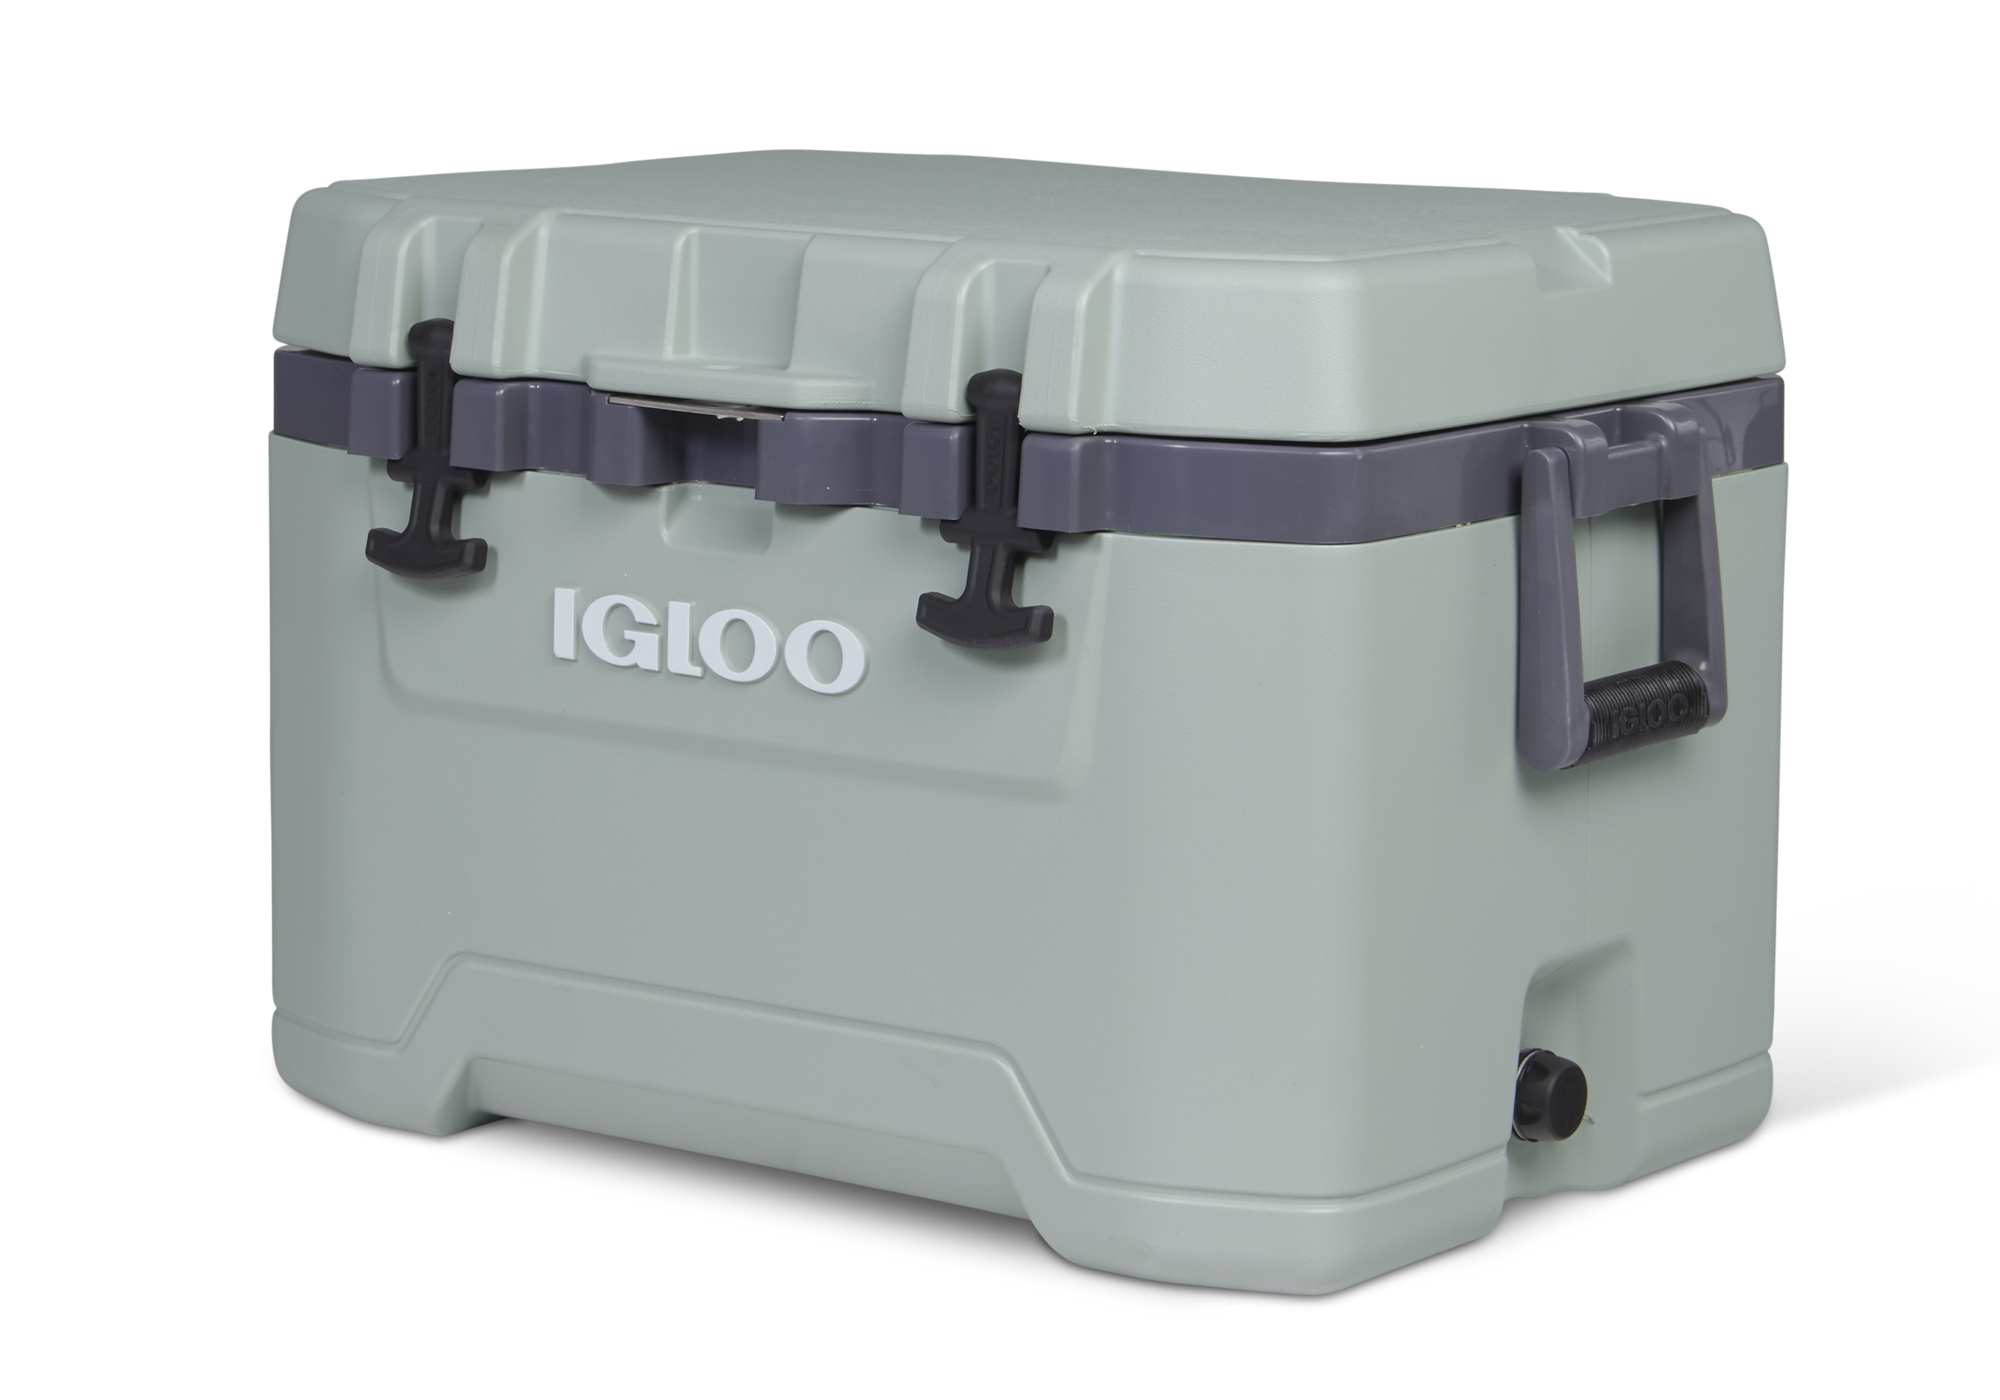 Igloo Overland 50 QT Ice Chest Cooler, Green - image 3 of 10